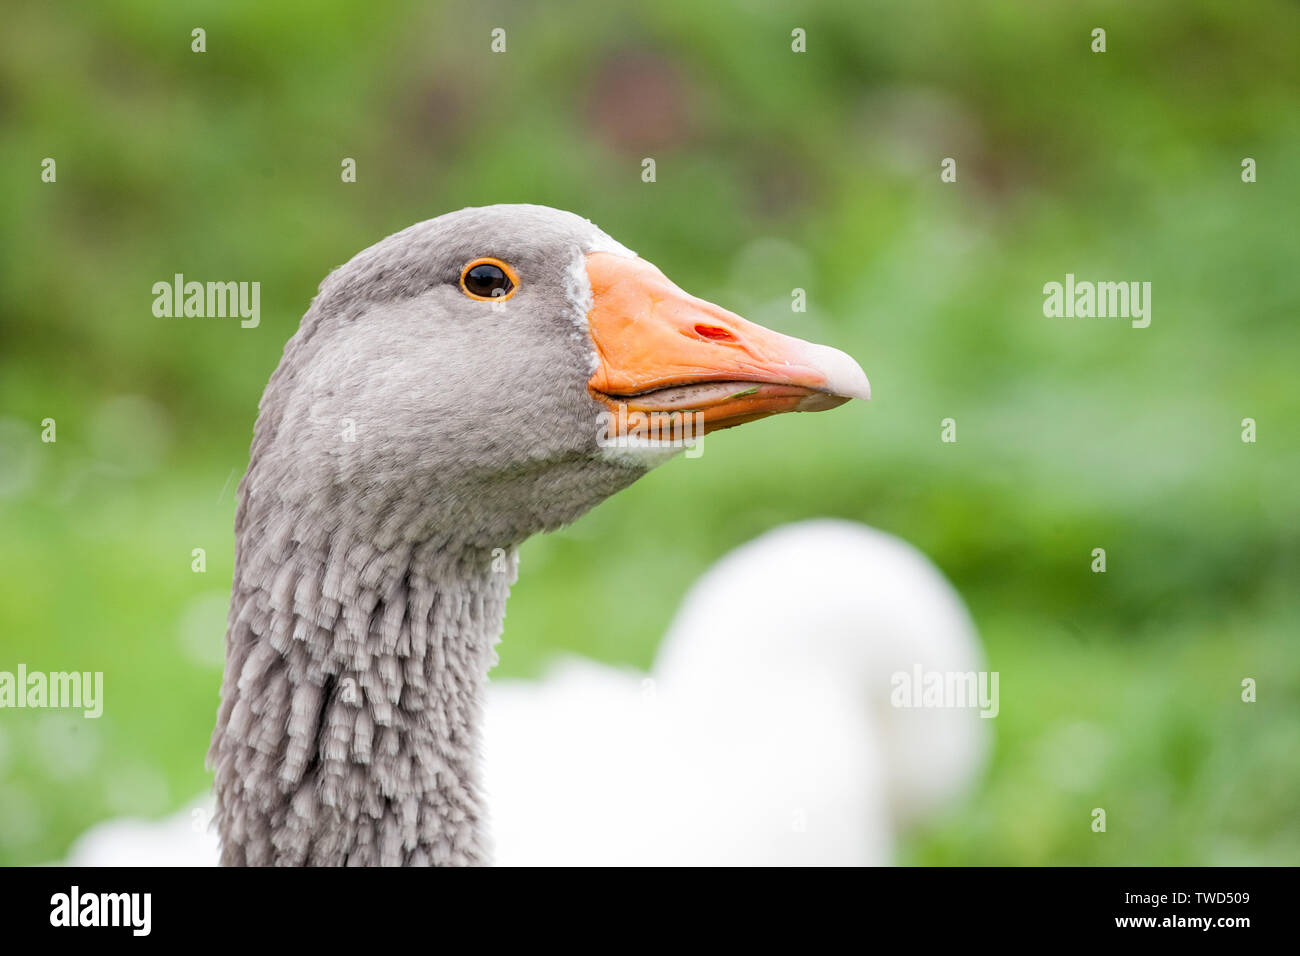 gray goose head closeup view on green grass summer outdoor background Stock Photo